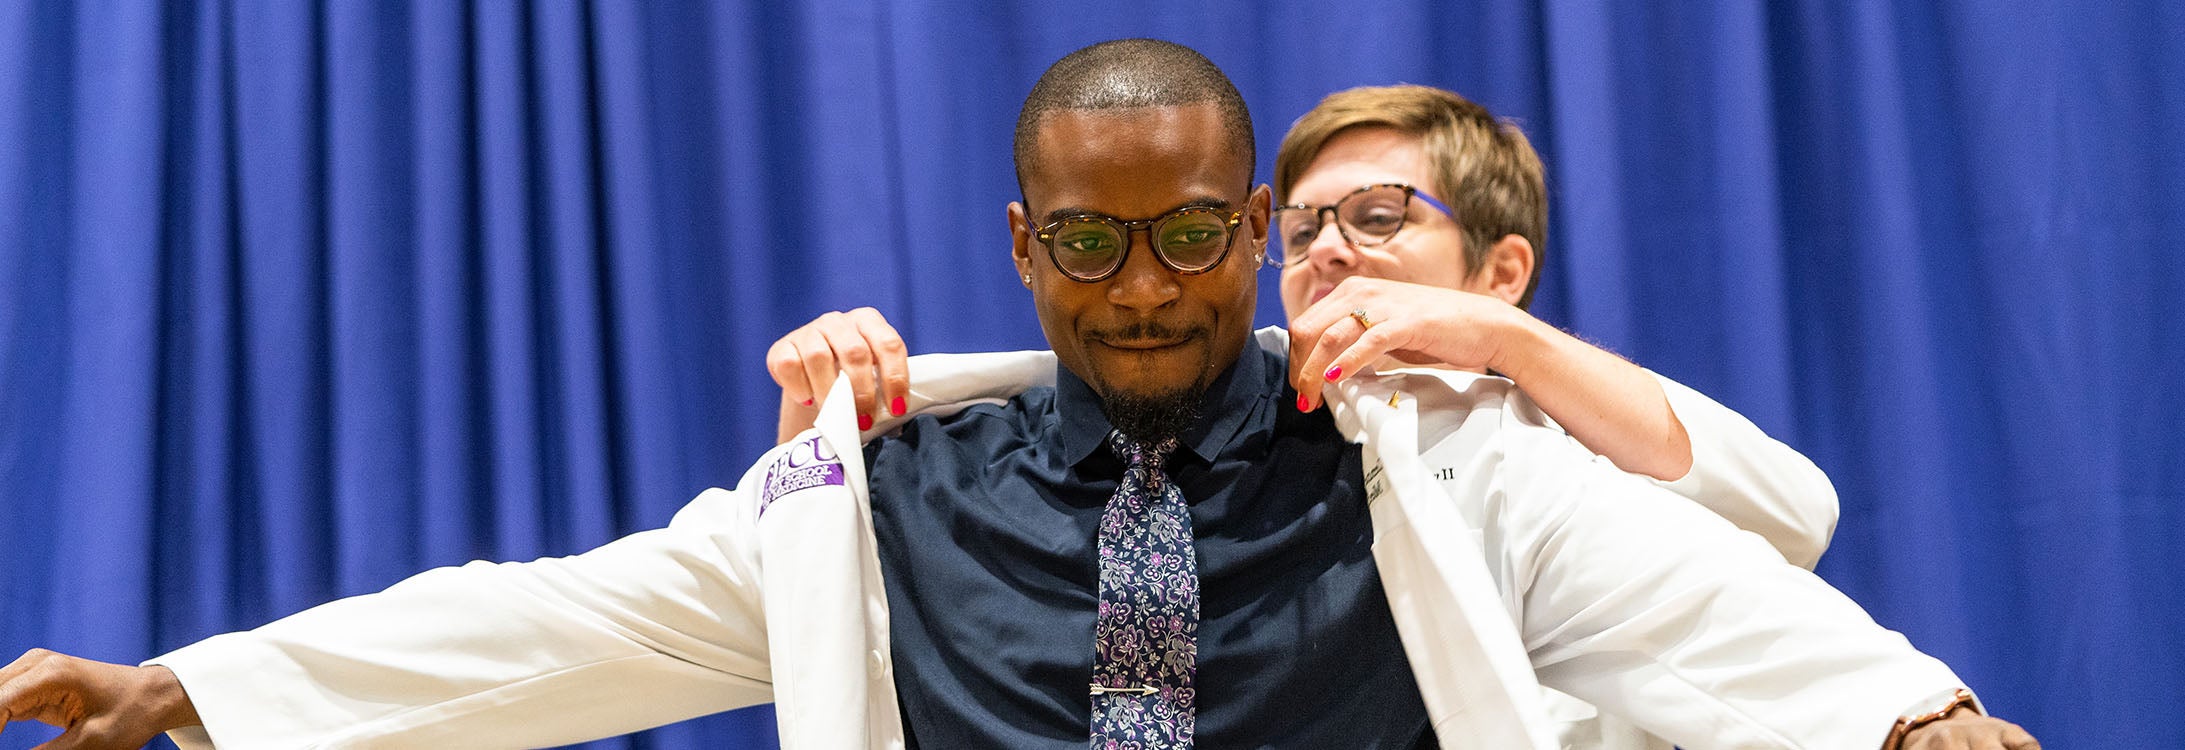 Kenneth Lowery II receives his coat during the Brody School of Medicine White Coat Ceremony for the Class of 2022. (Photo by Cliff Hollis)